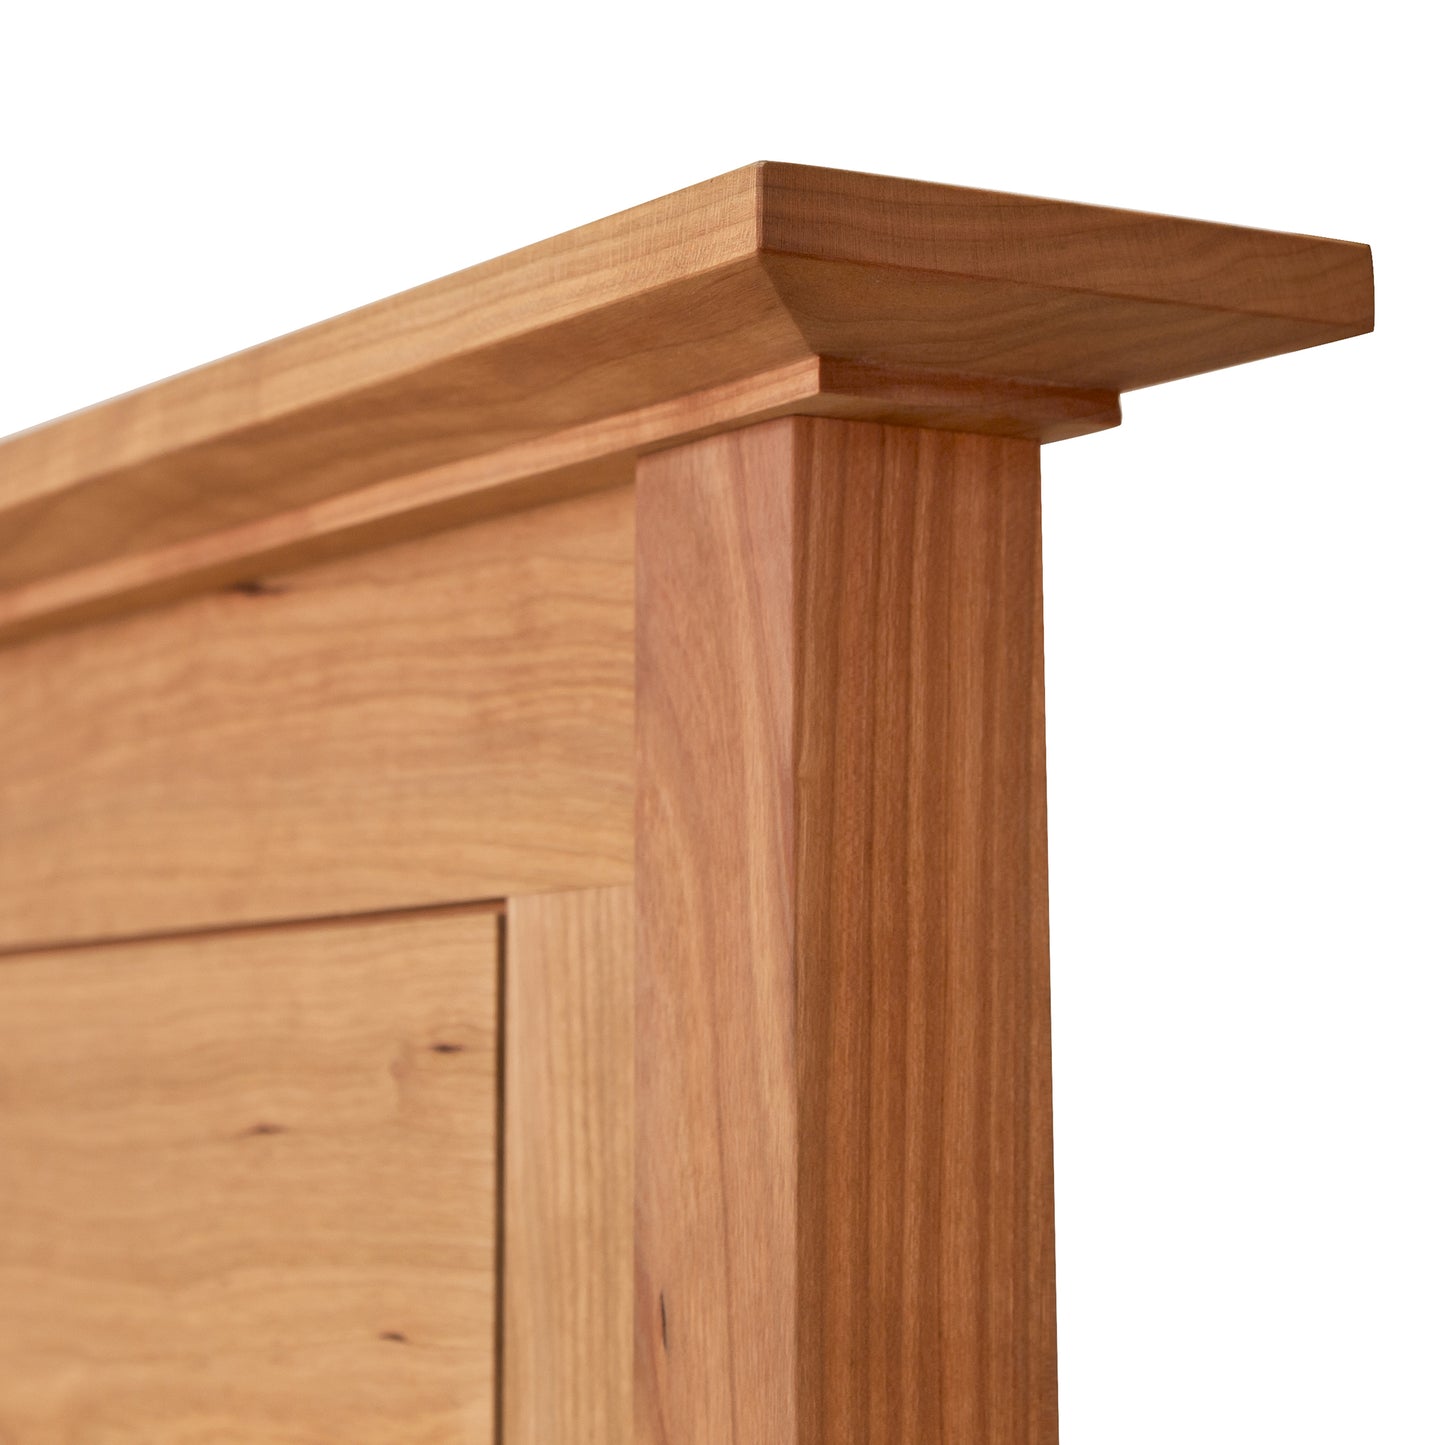 Close-up of the corner of a wooden cabinet showing detailed wood grain and craftsmanship. The design features a smooth, polished finish and joins between the American Shaker Panel Bed and vertical side by Maple Corner Woodworks.